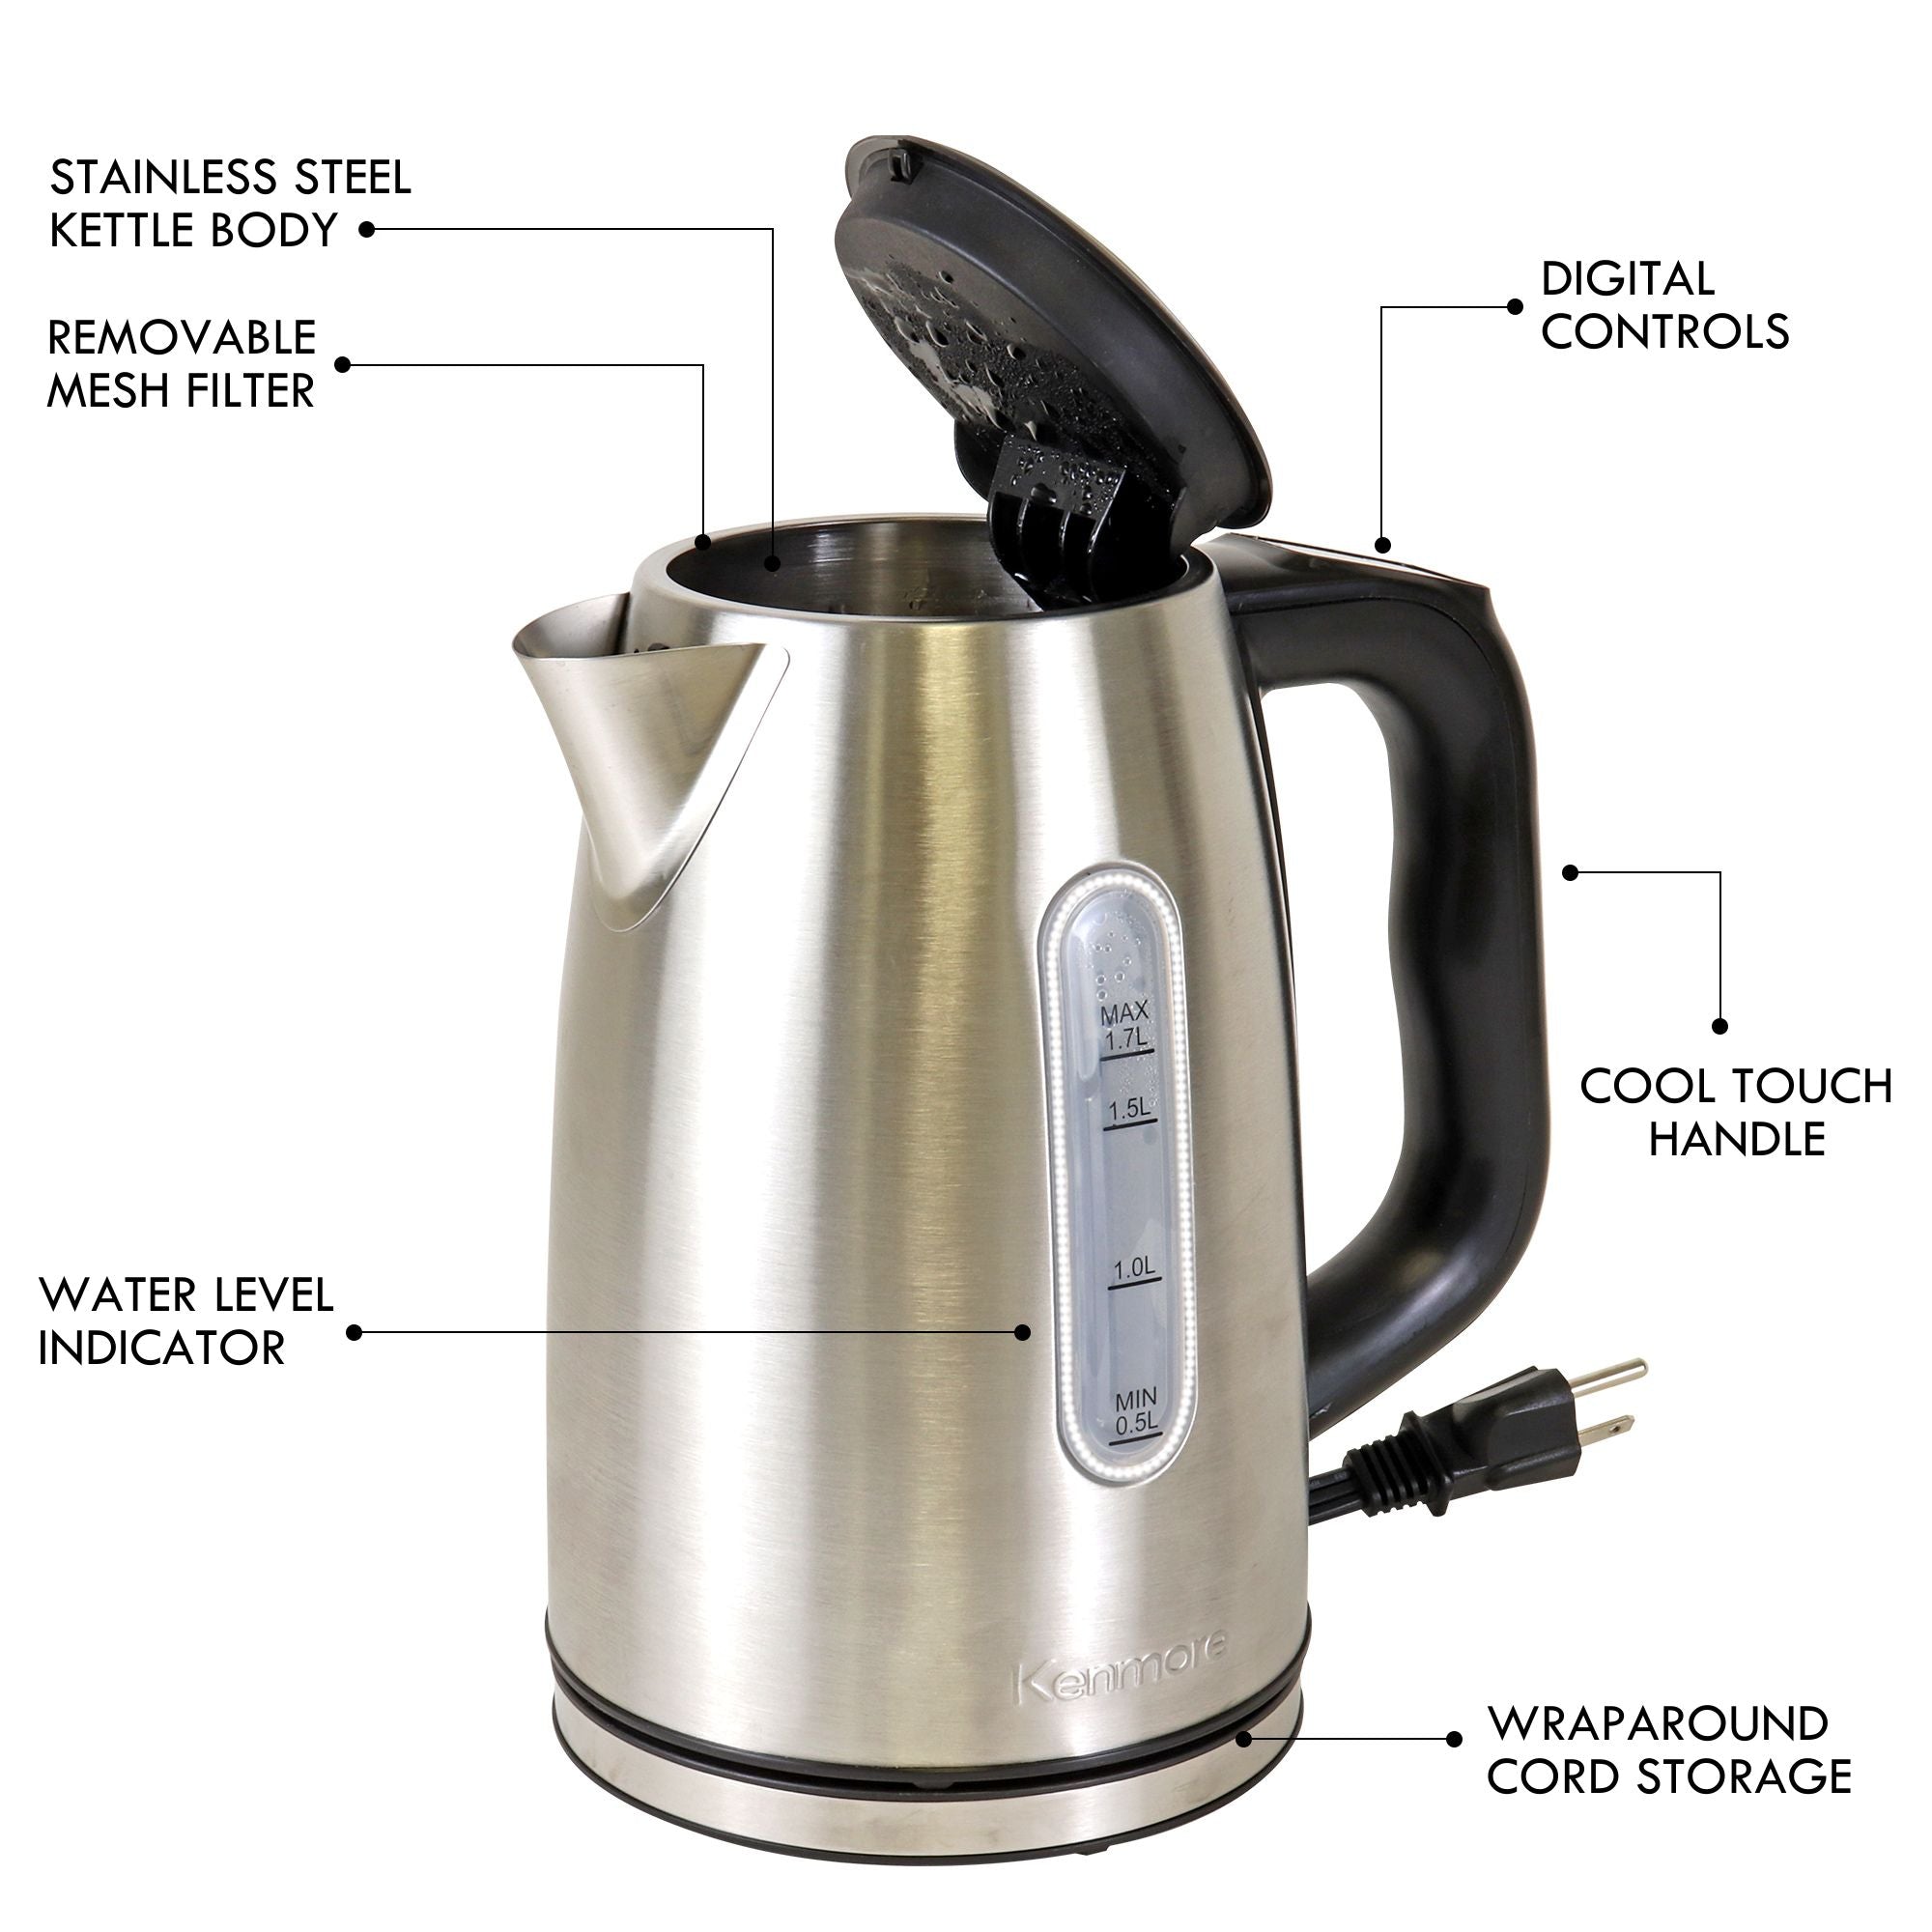 Kenmore 1.7 L programmable tea kettle, open, on a white background with parts and accessories labeled: Stainless steel kettle body; removable mesh filter; digital controls; cool touch handle; wraparound cord storage; water level indicator